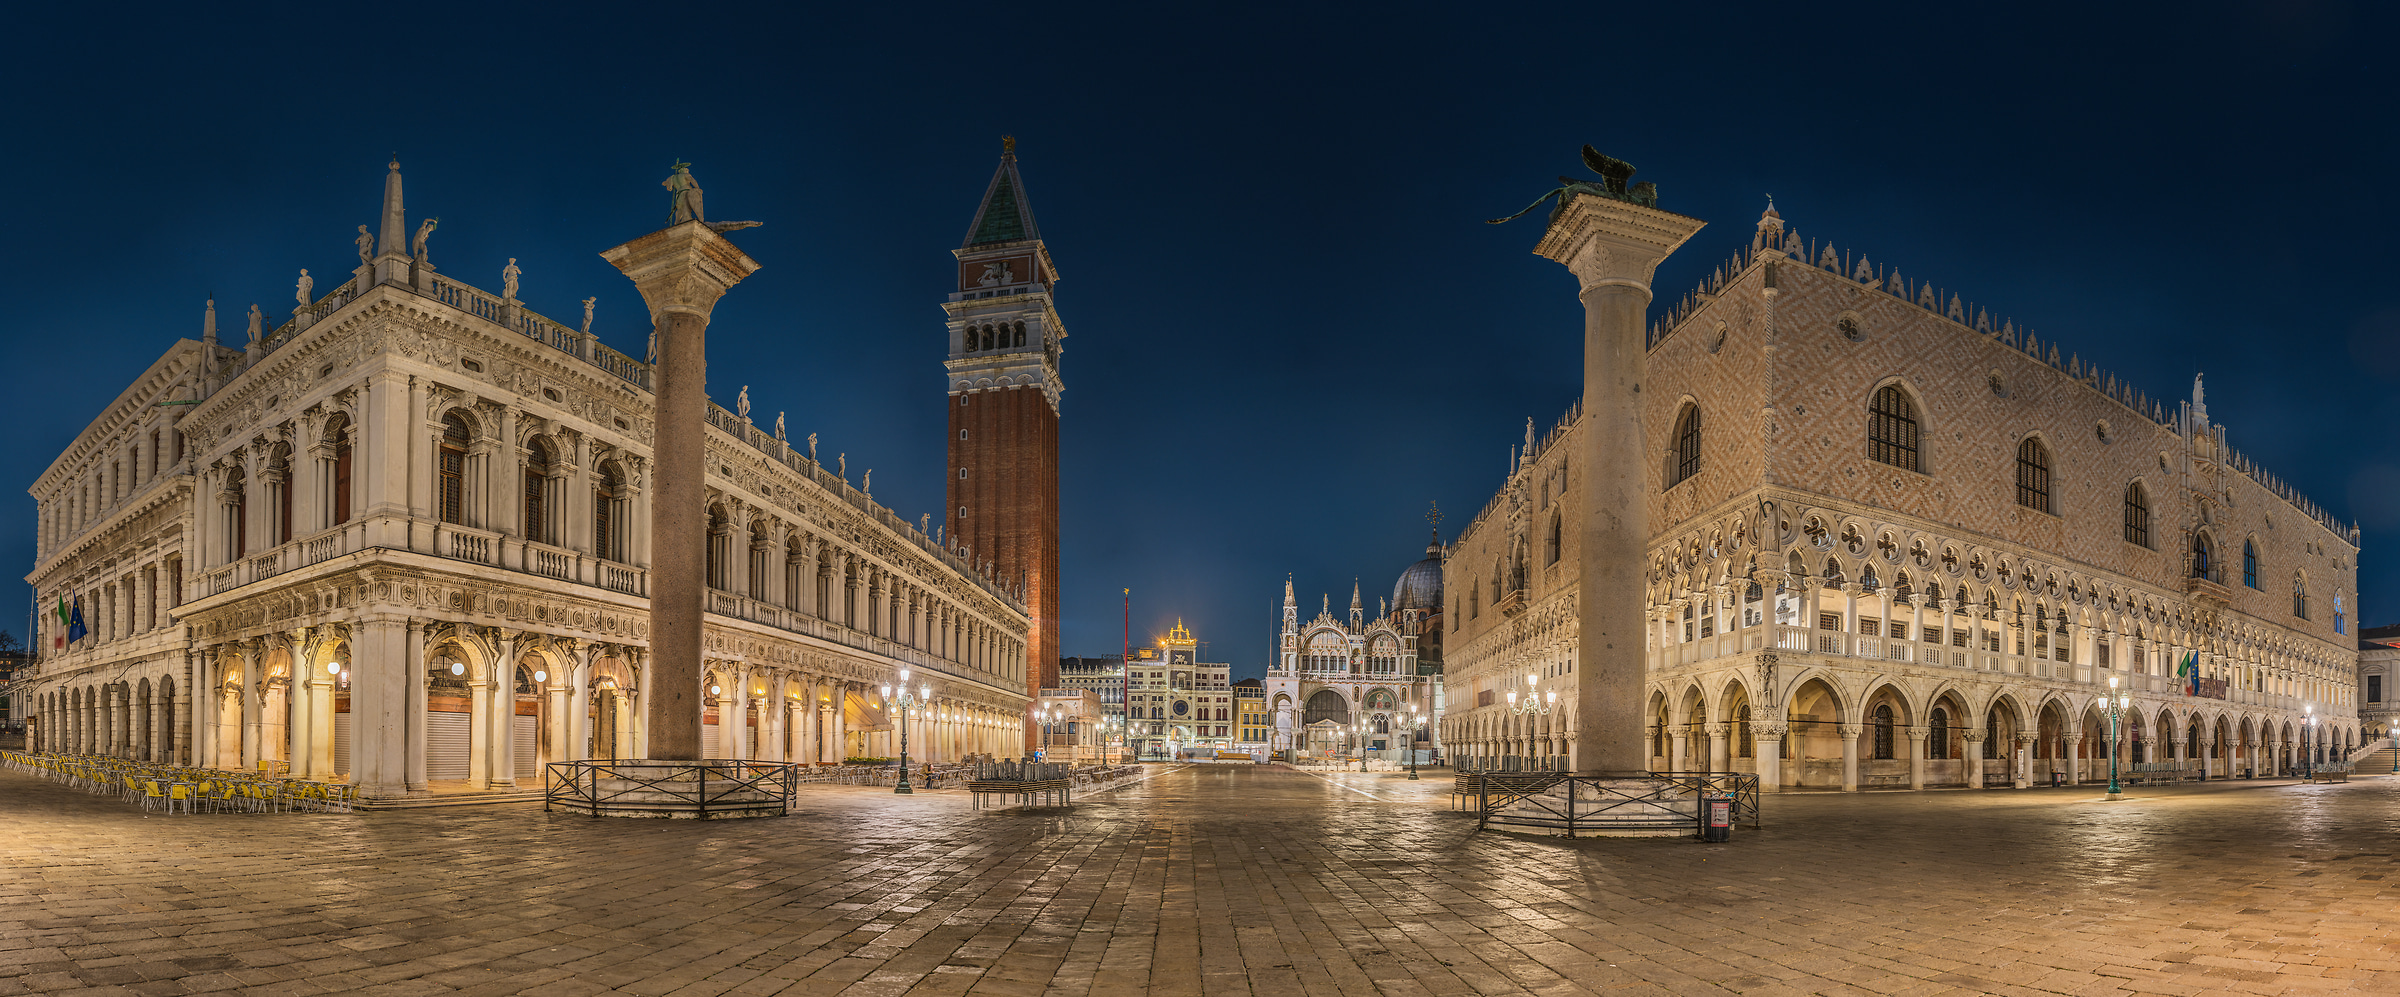 1,785 megapixels! A very high resolution, large-format VAST photo print of Piazza San Marco at night; panorama photograph created by Alfred Feil in Piazza San Marco, Venice, Italy